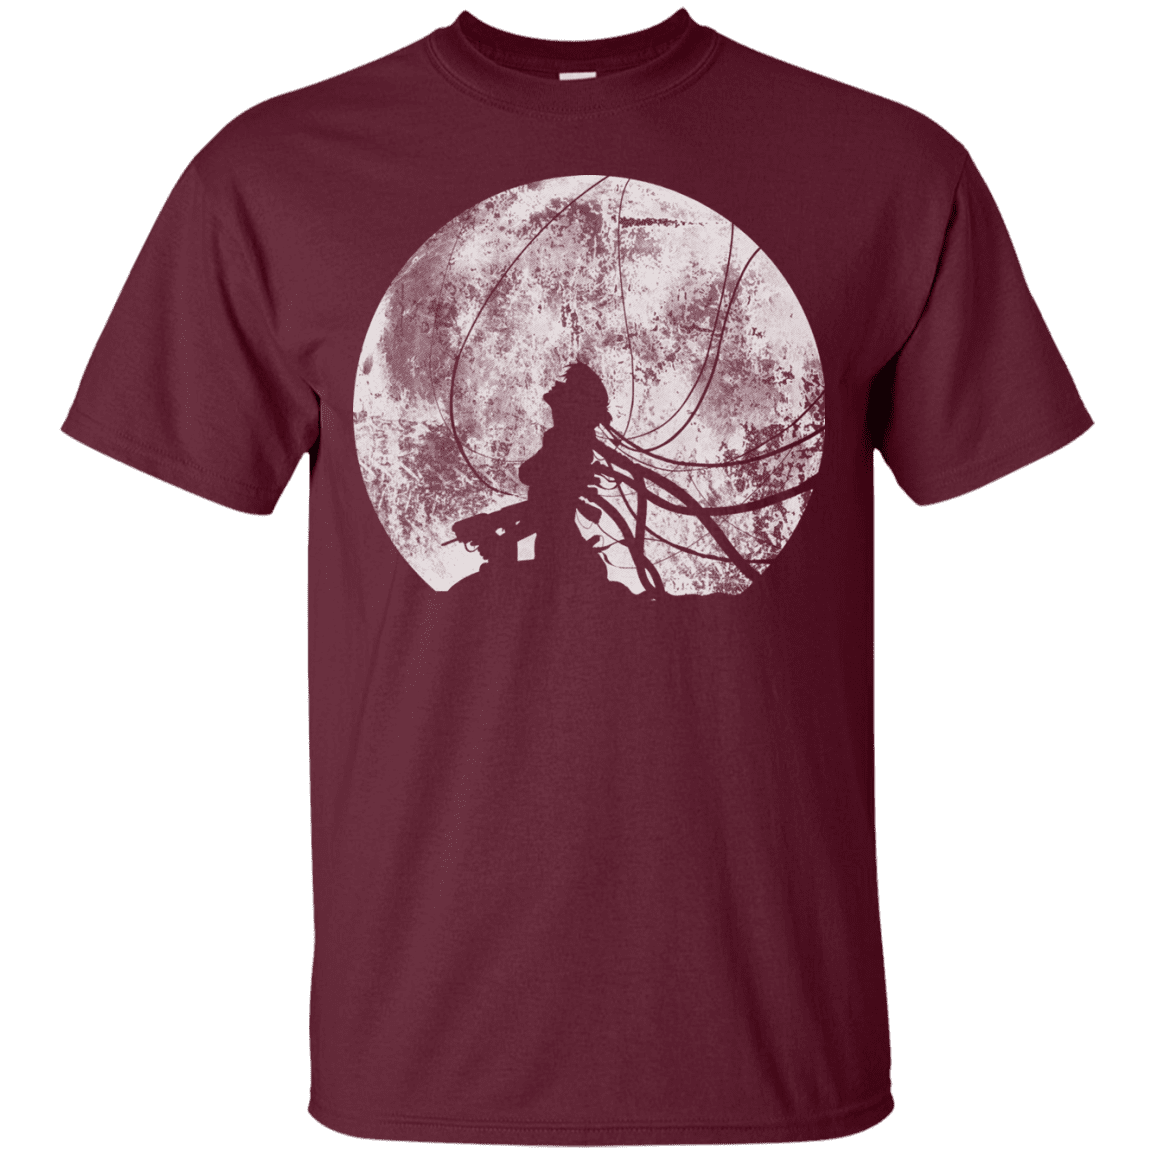 T-Shirts Maroon / S Shell of a Ghost T-Shirt